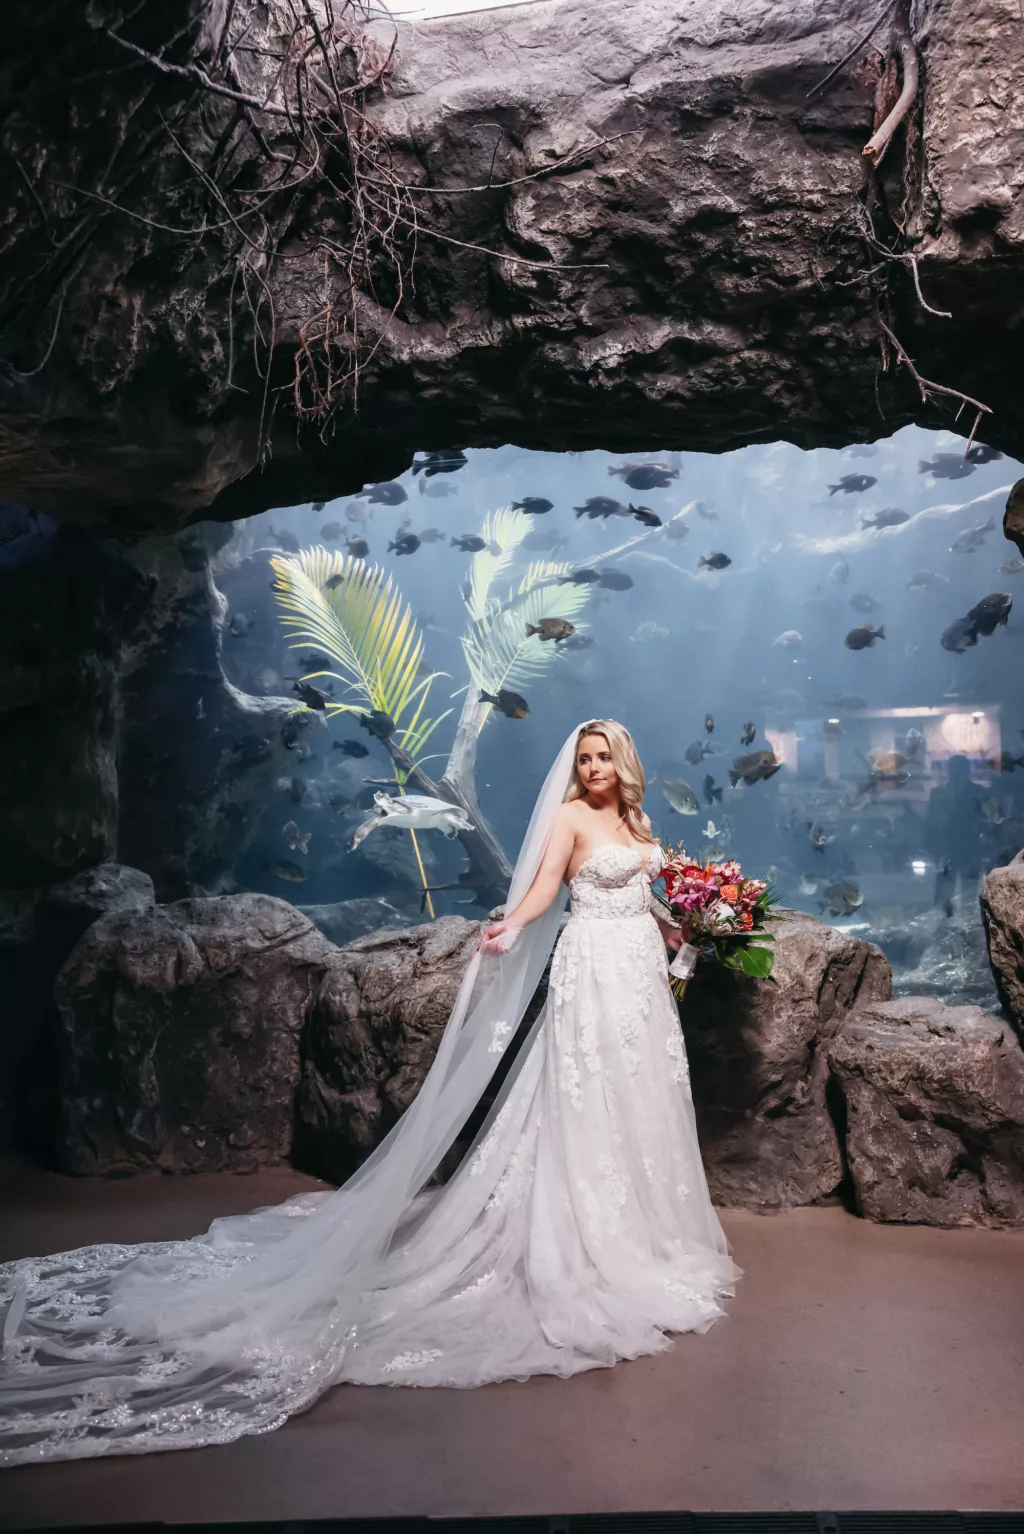 White Lace A-Line Wedding Dress Ideas | Tropical Wedding Ceremony in the Coral Reef Gallery | Elegant Hair and Makeup Inspiration | Tampa Bay Boutique Truly Forever Bridal Tampa | Event Venue The Florida Aquarium | Hair and Makeup Femme Akoi Beauty Studio | Photographer Lifelong Photography Studio